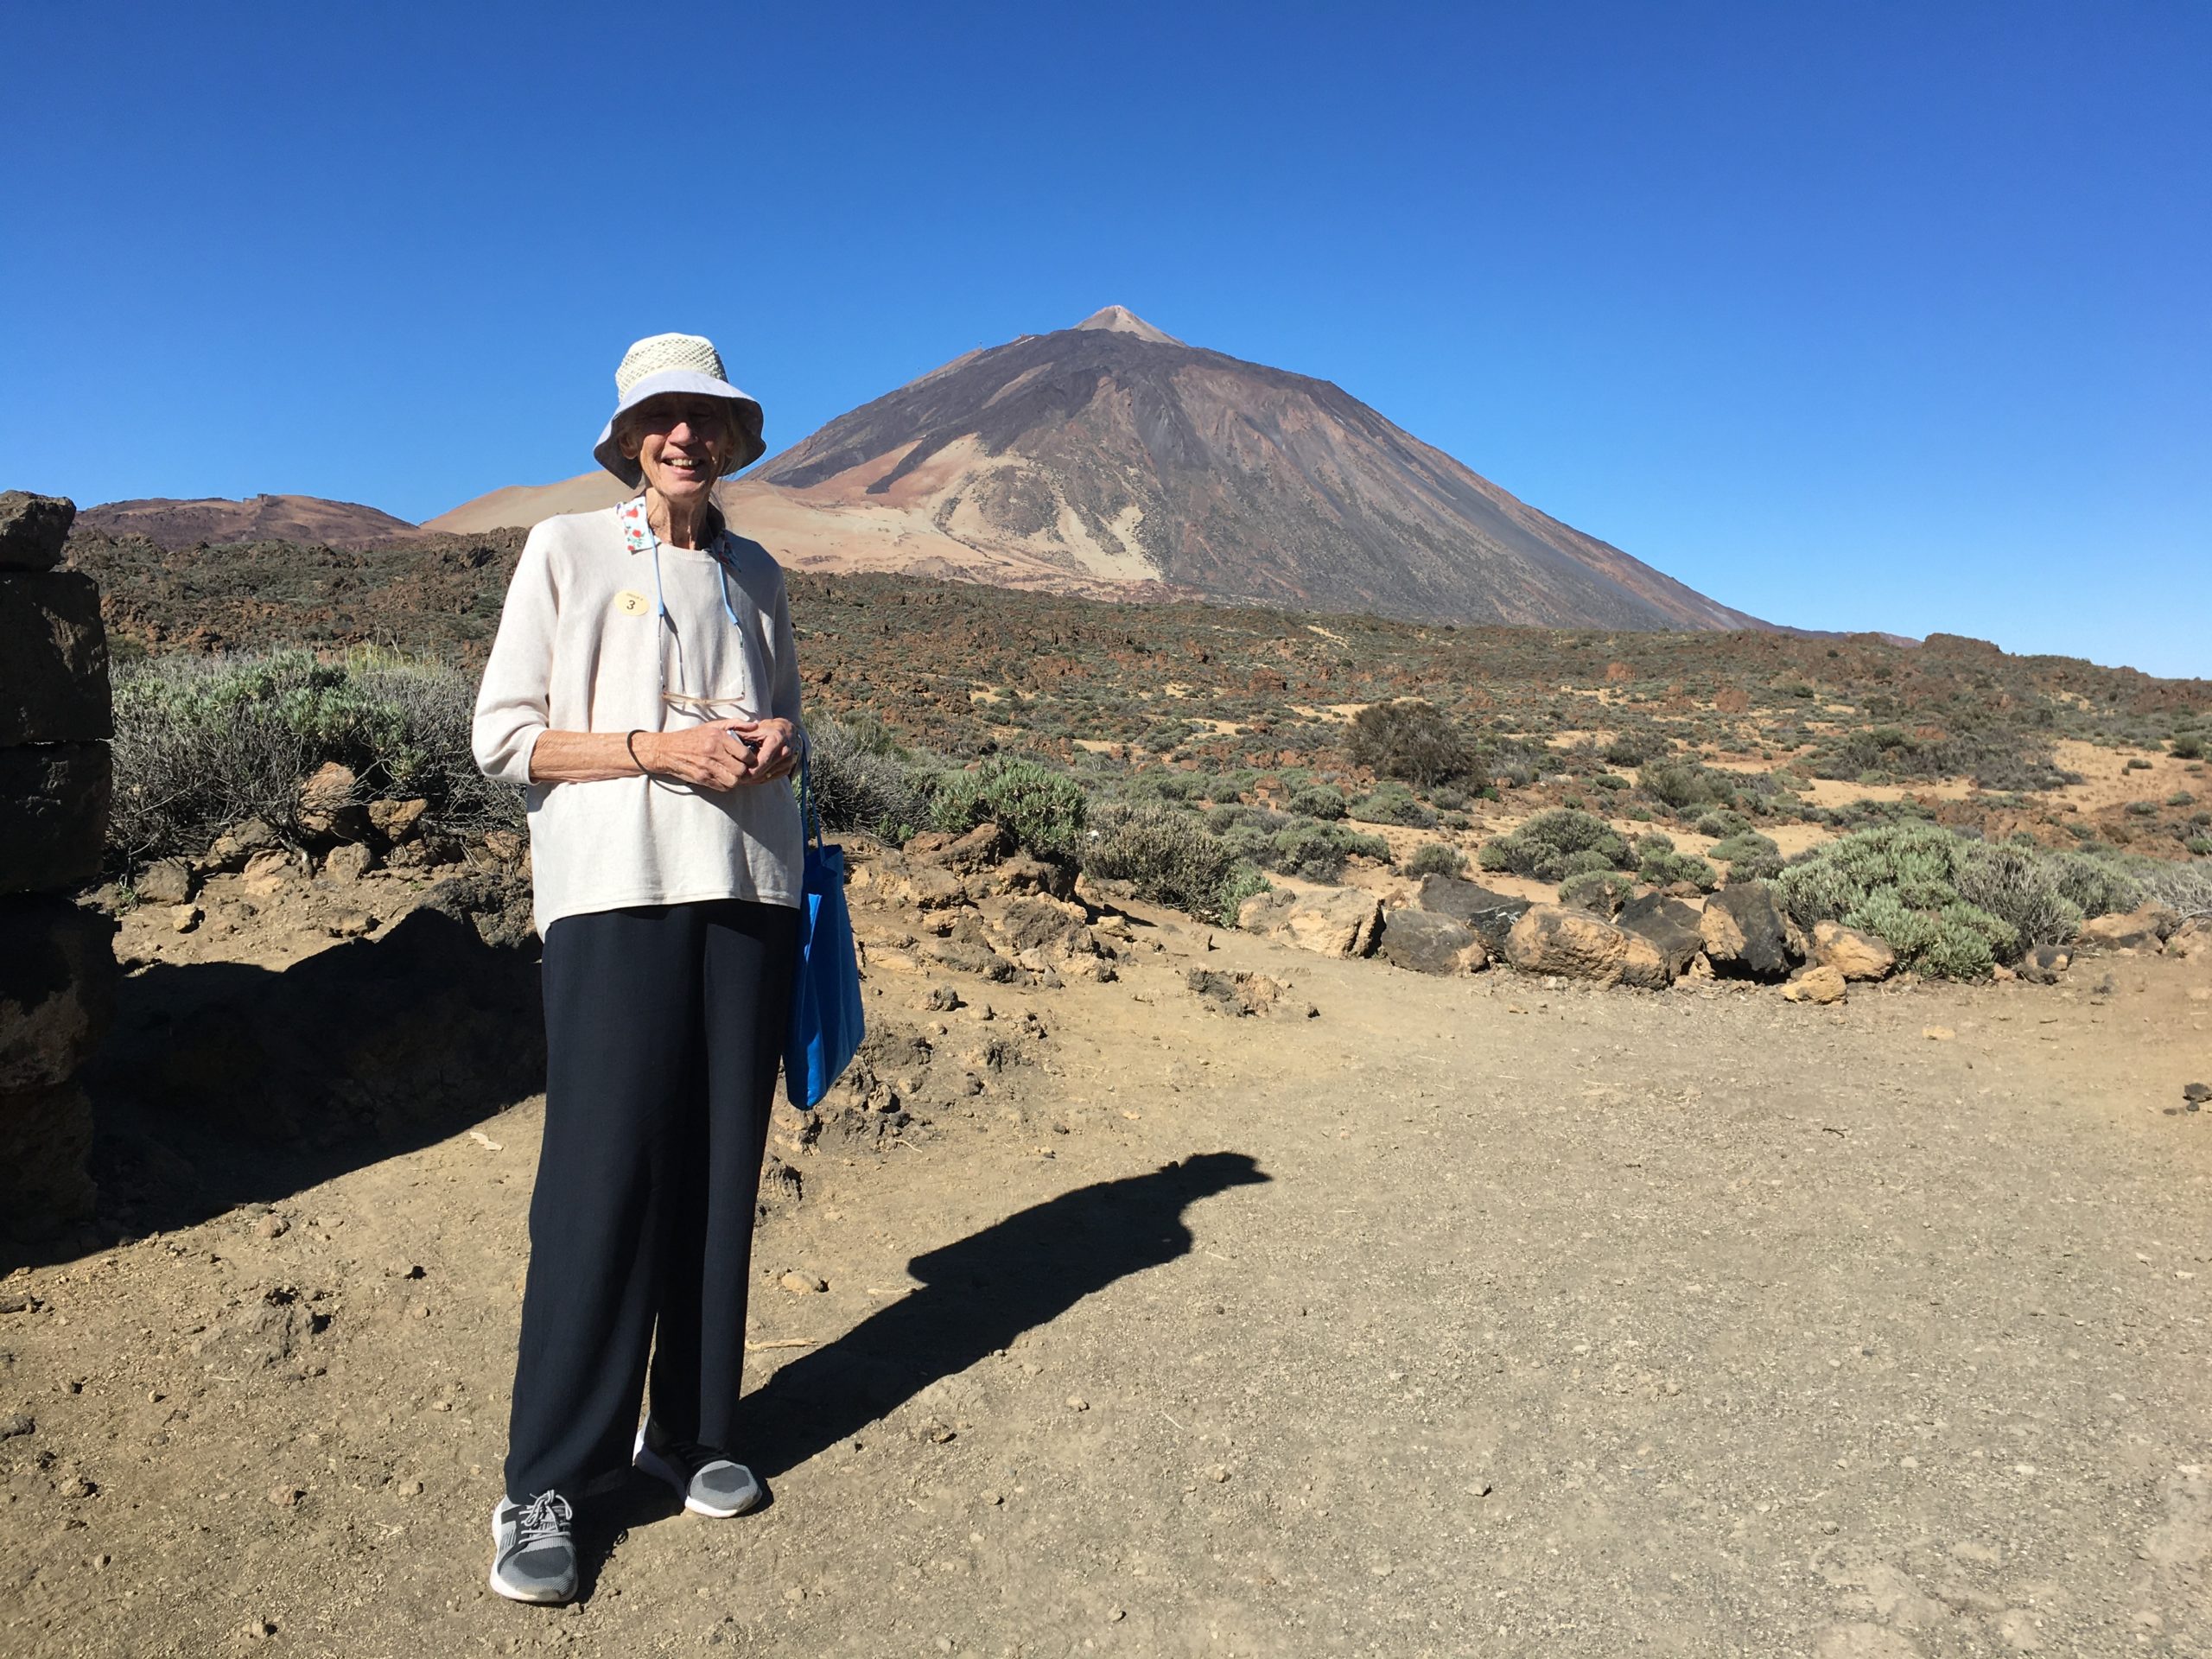 Tablemate Anne decorates the surrounds of Mount Teide, Tenerife